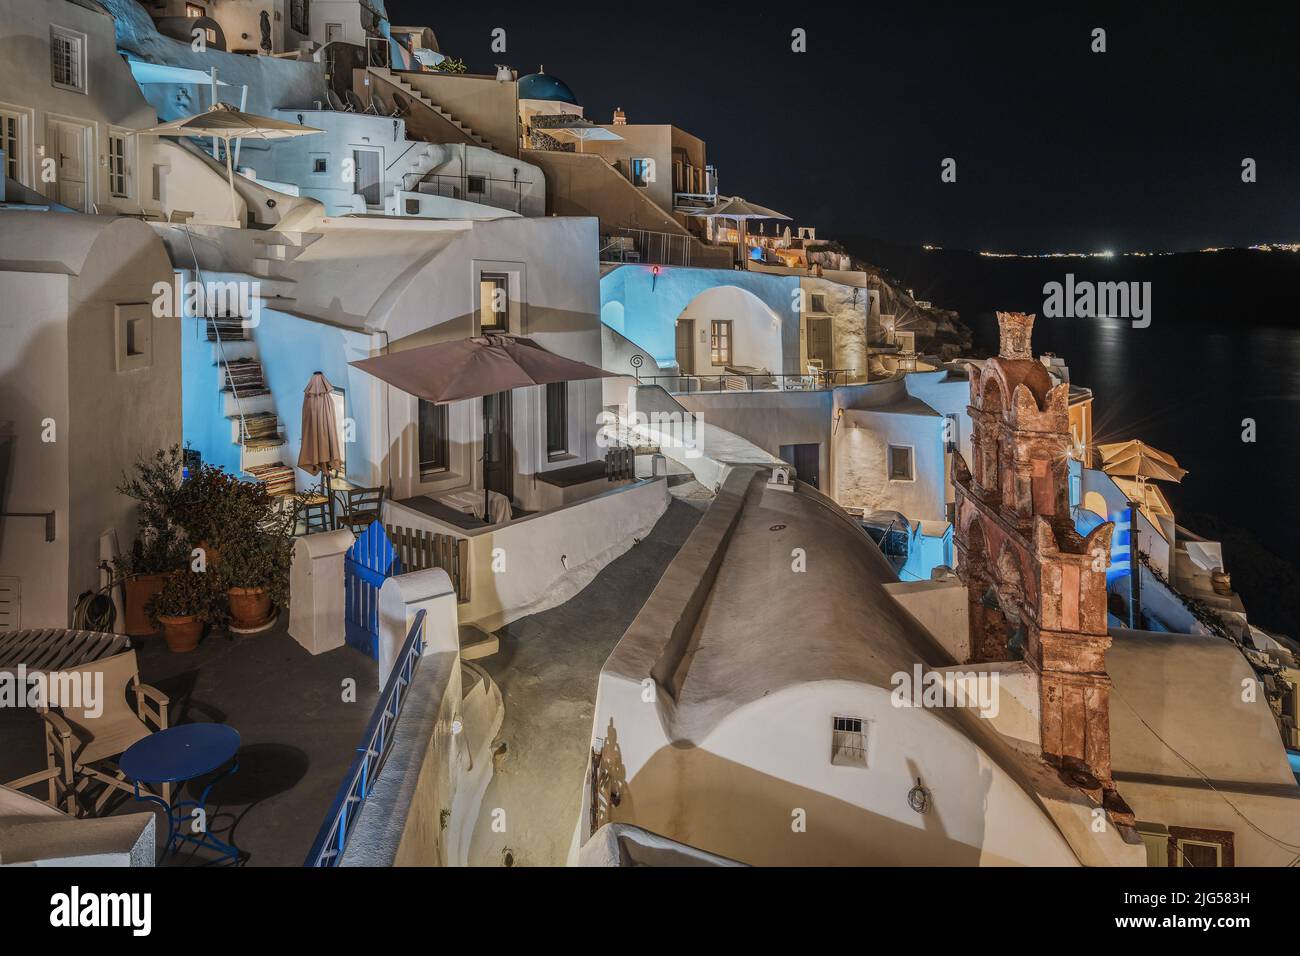 View of Oia village at night with typical whitewashed houses illuminated, Santorini, Greece Stock Photo